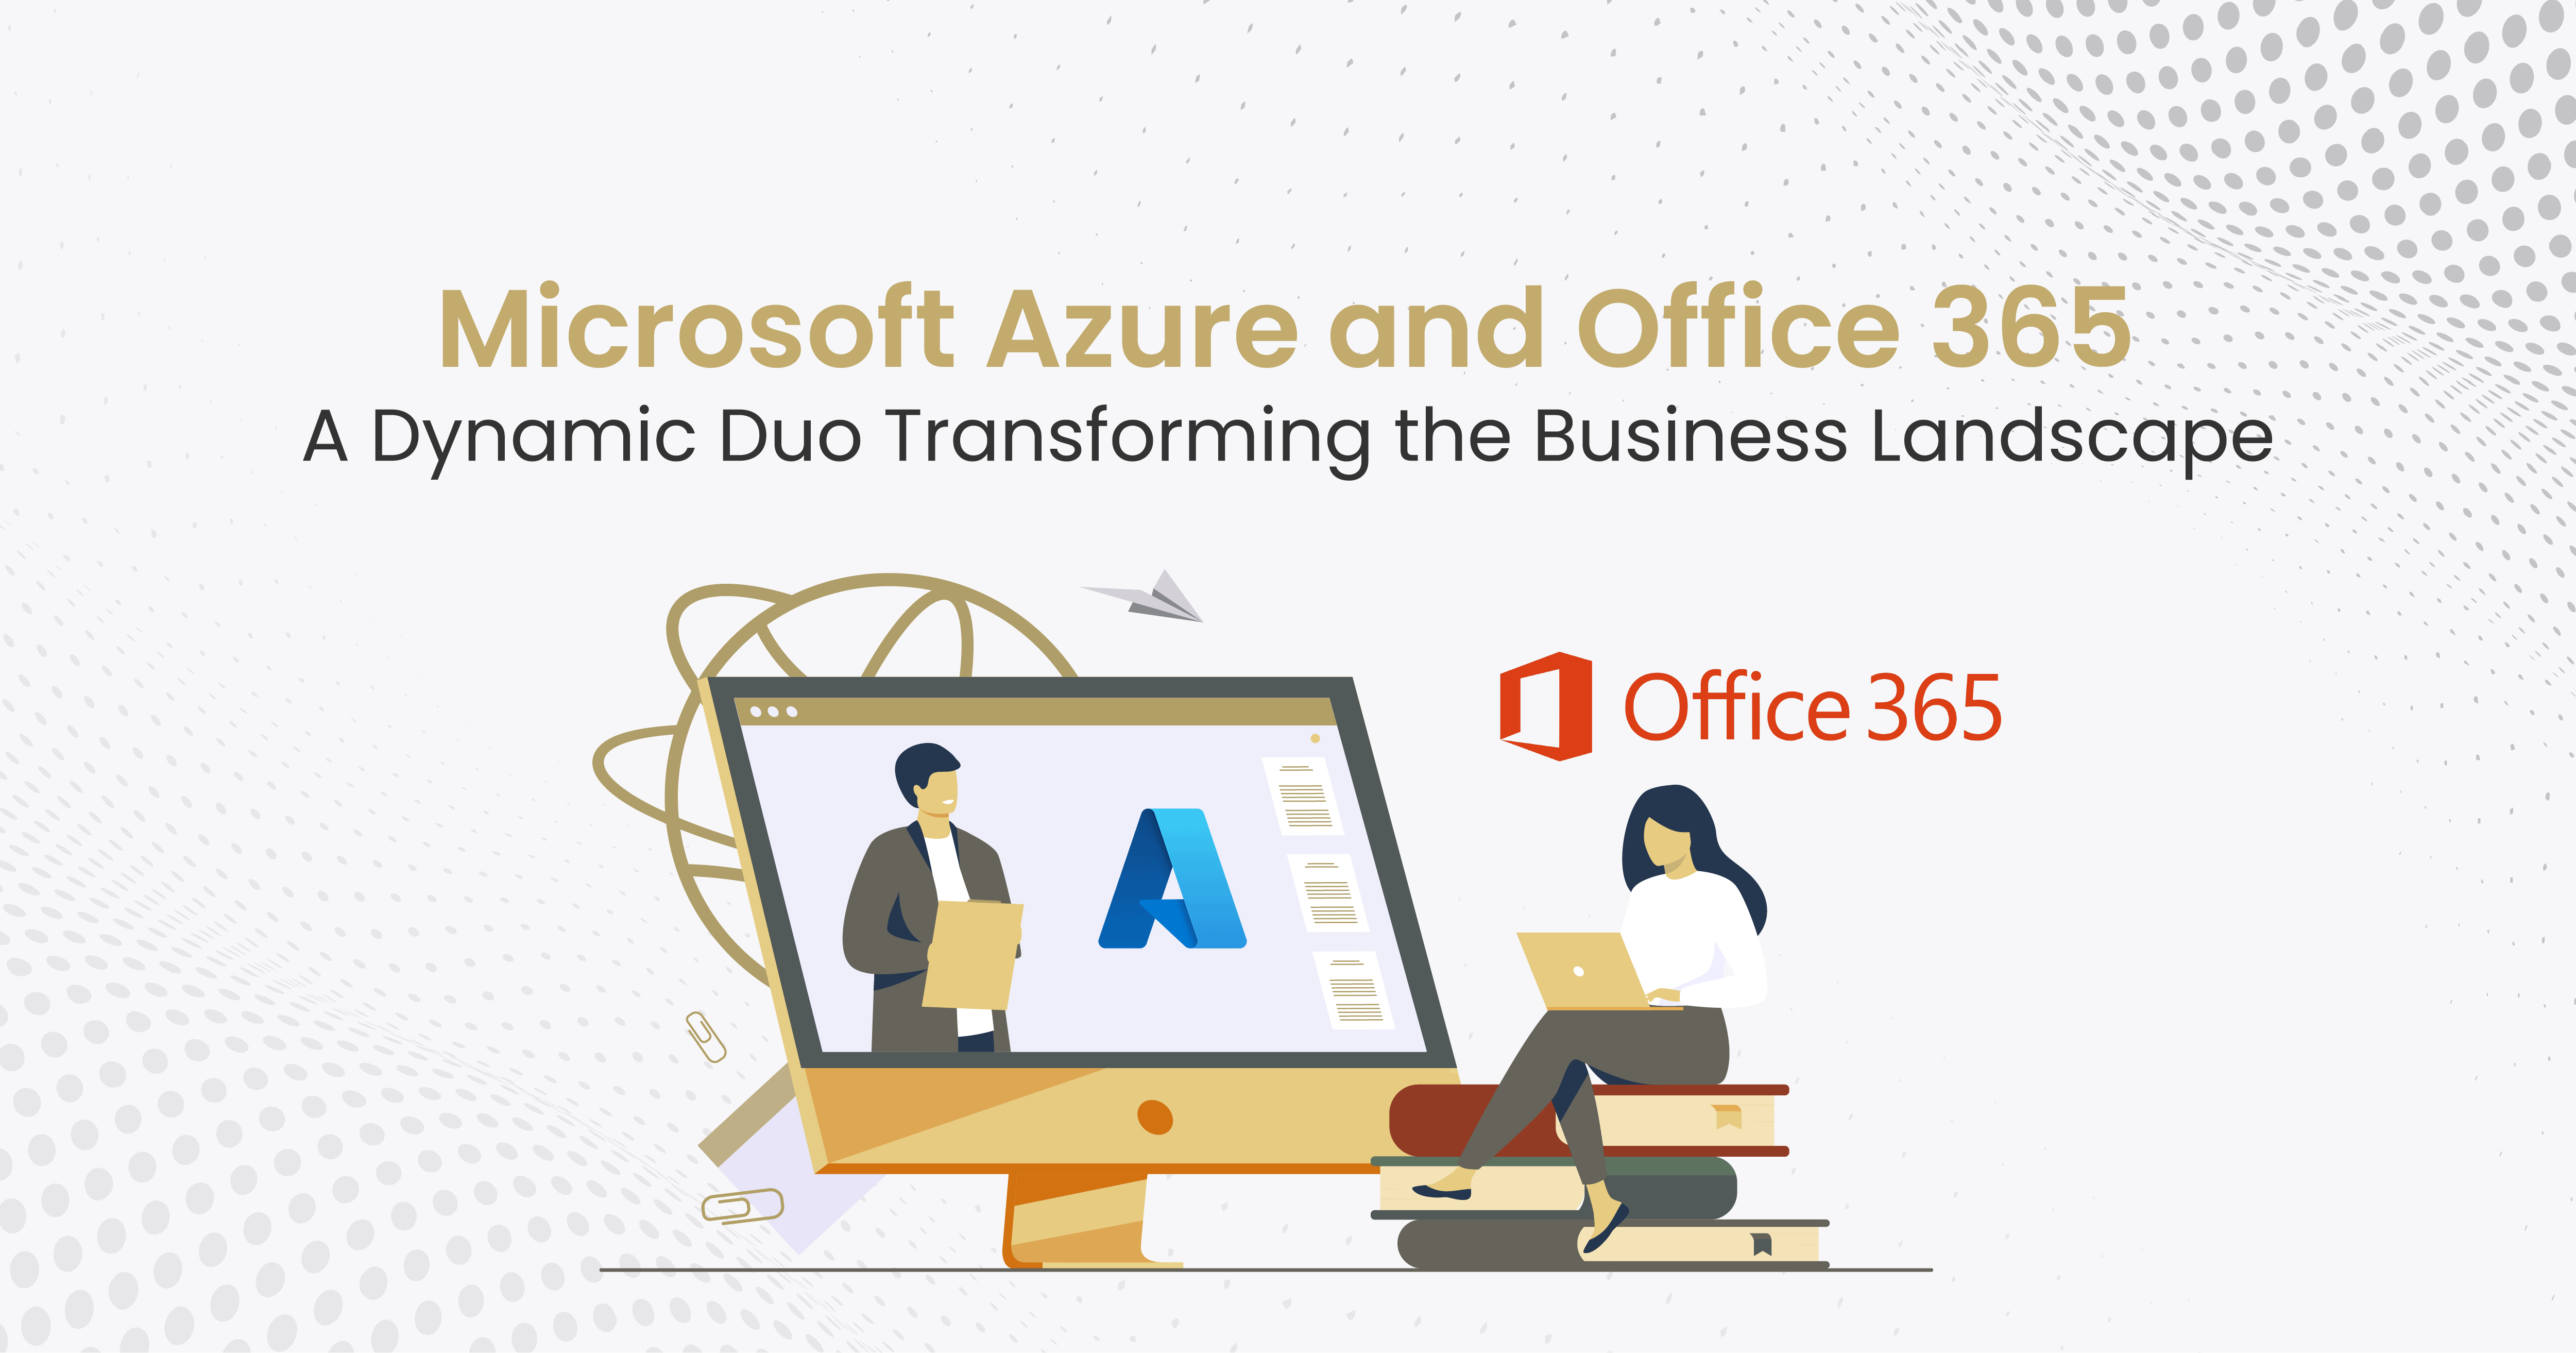 Microsoft Azure and Office 365